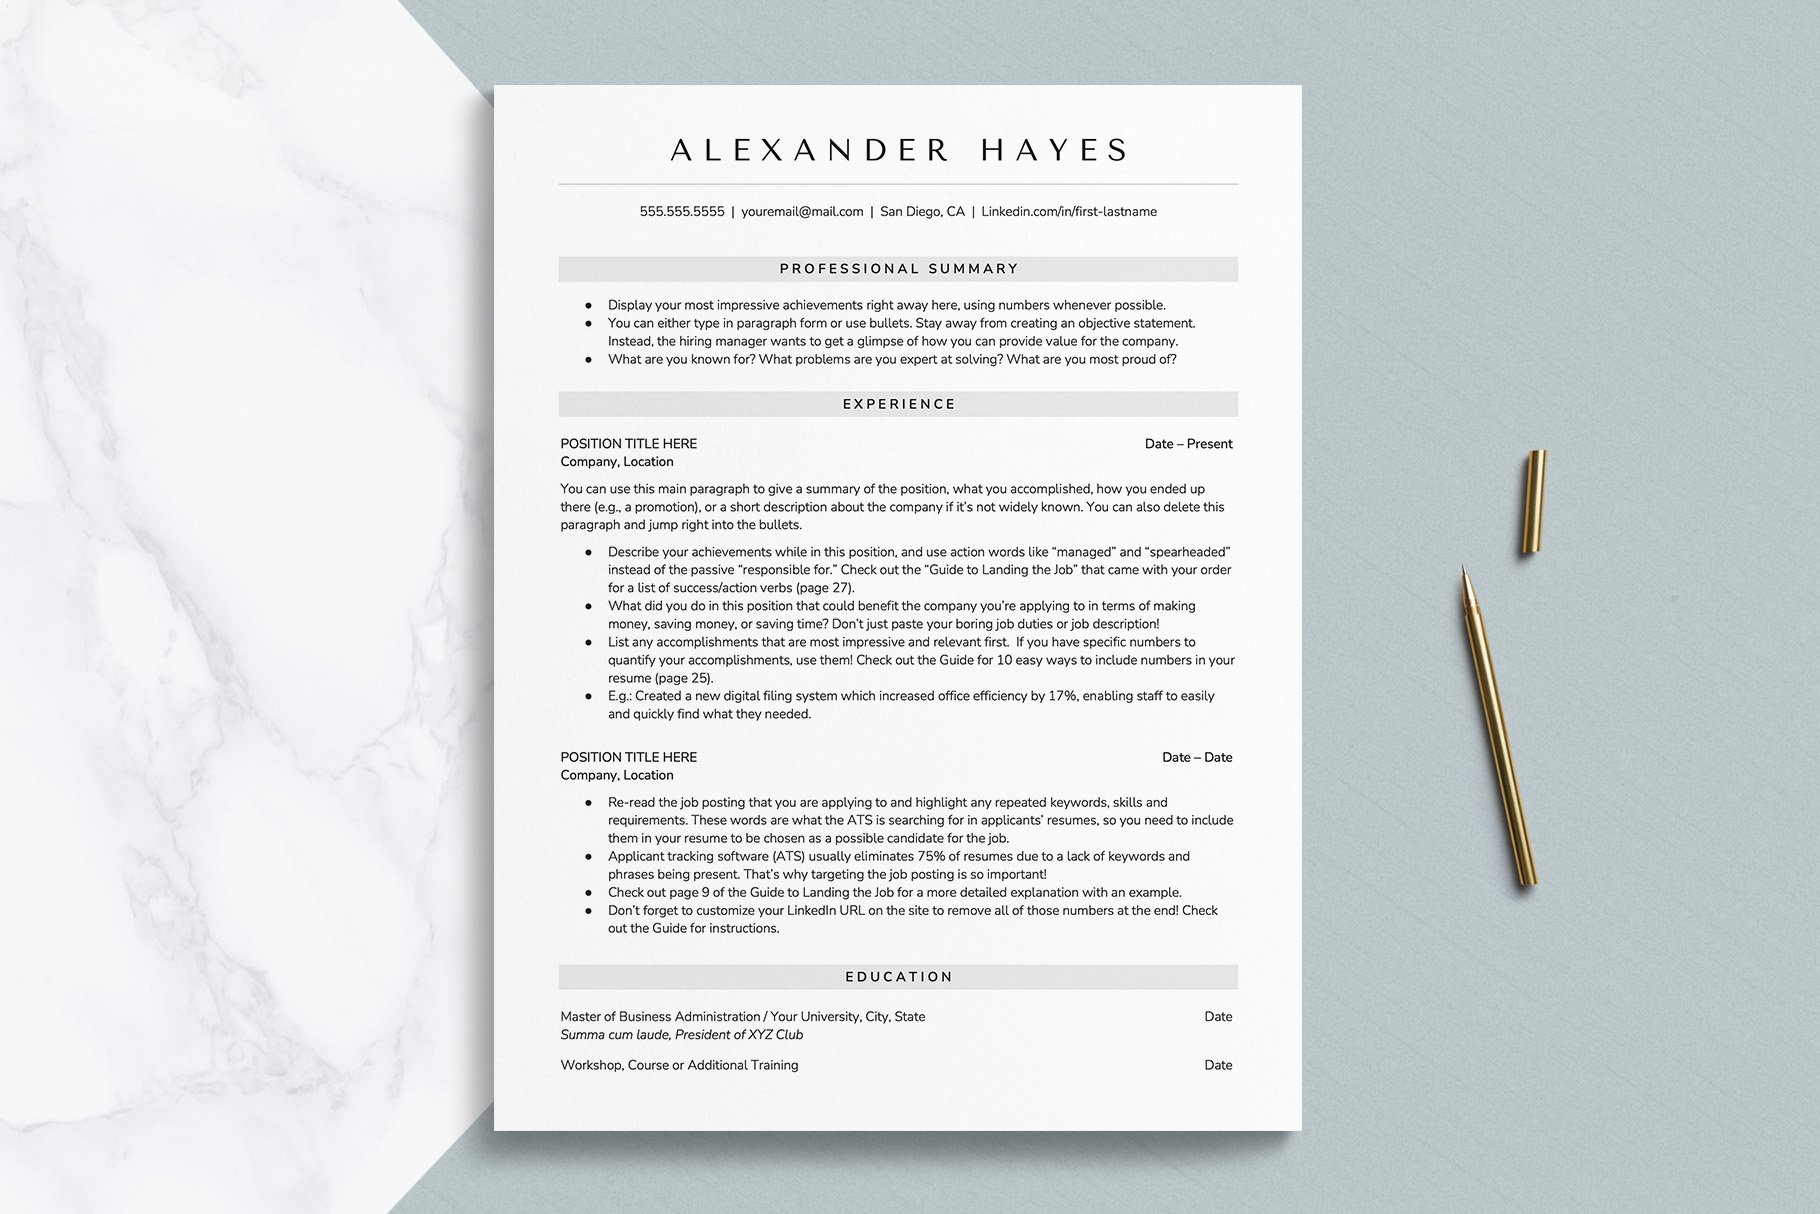 ATS Resume Template Format preview image.